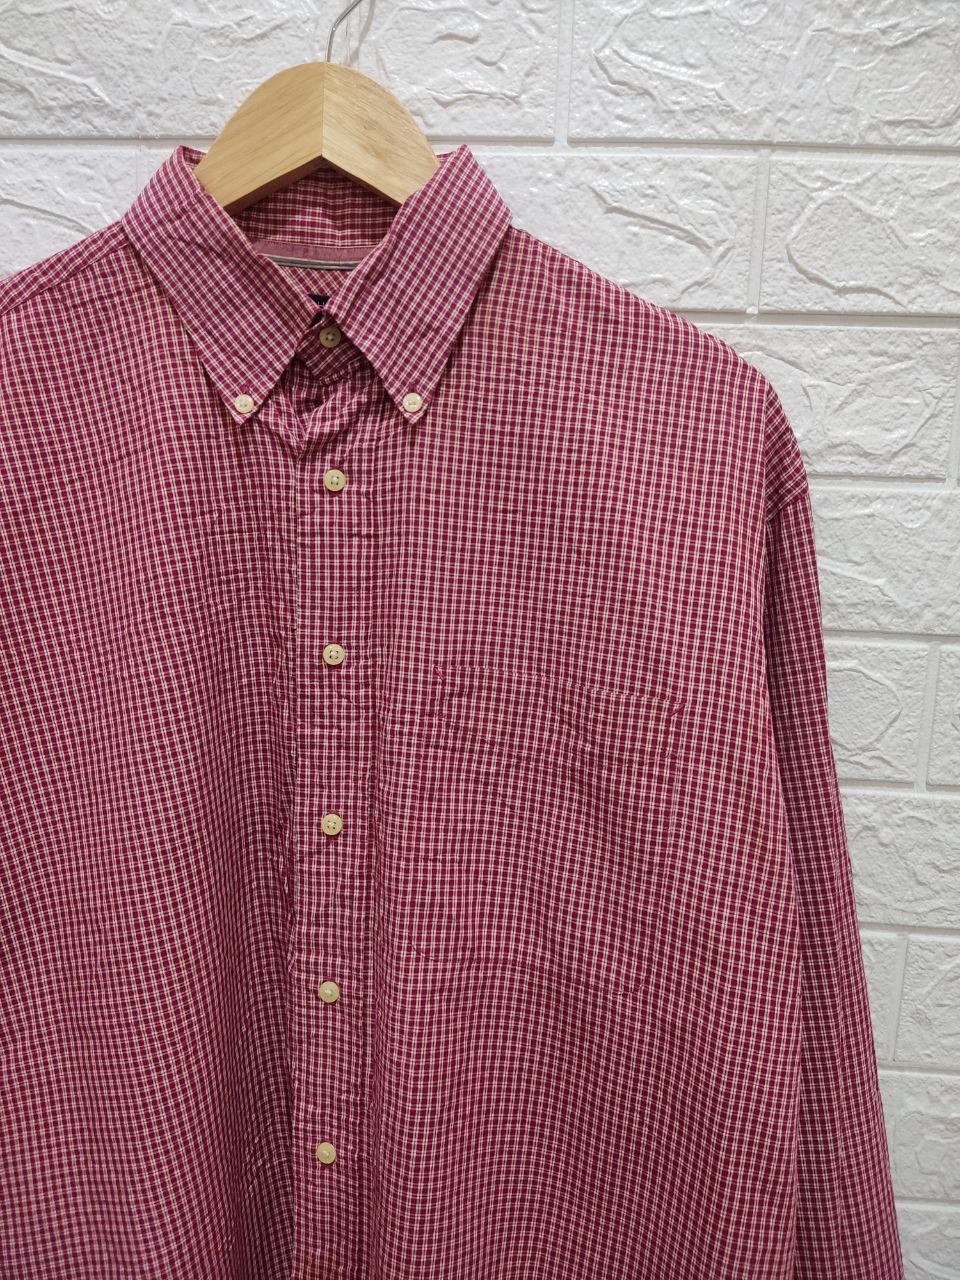 Tommy Hilfiger Red Plaid Checked Oversized Long Sleeve Shirt - 4